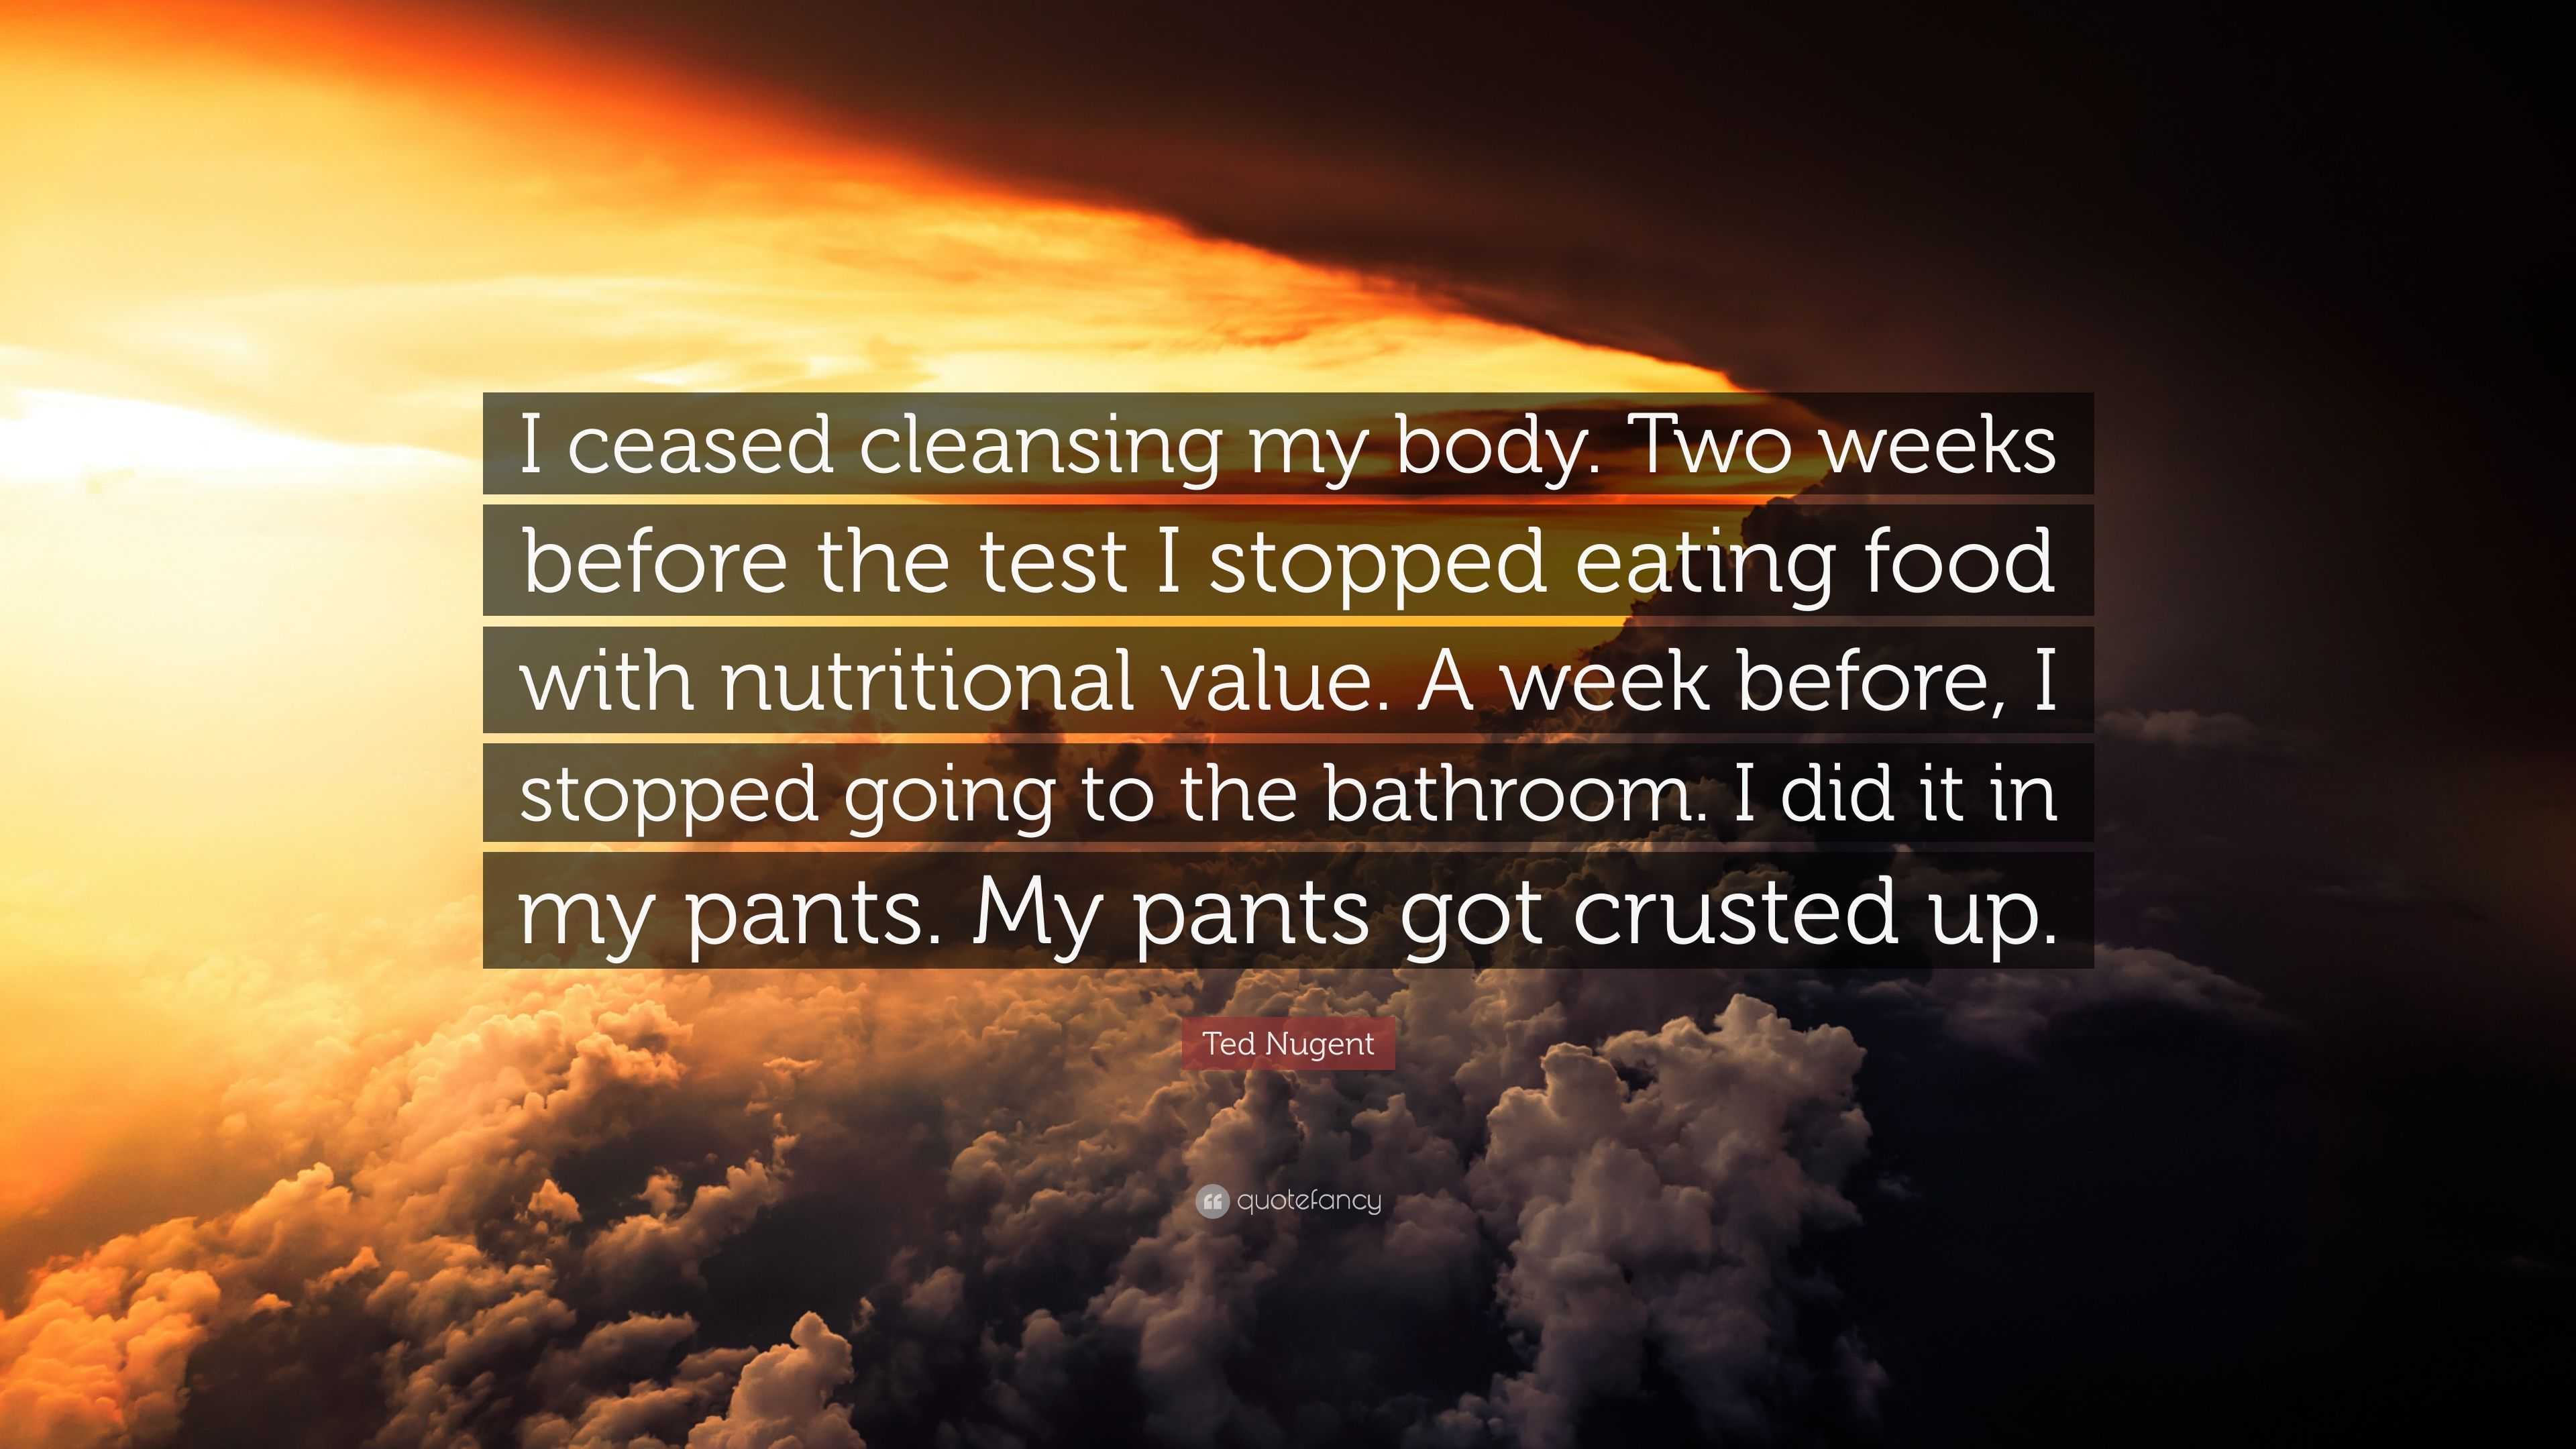 Ted Nugent Quote: “I ceased cleansing my body. Two weeks before the